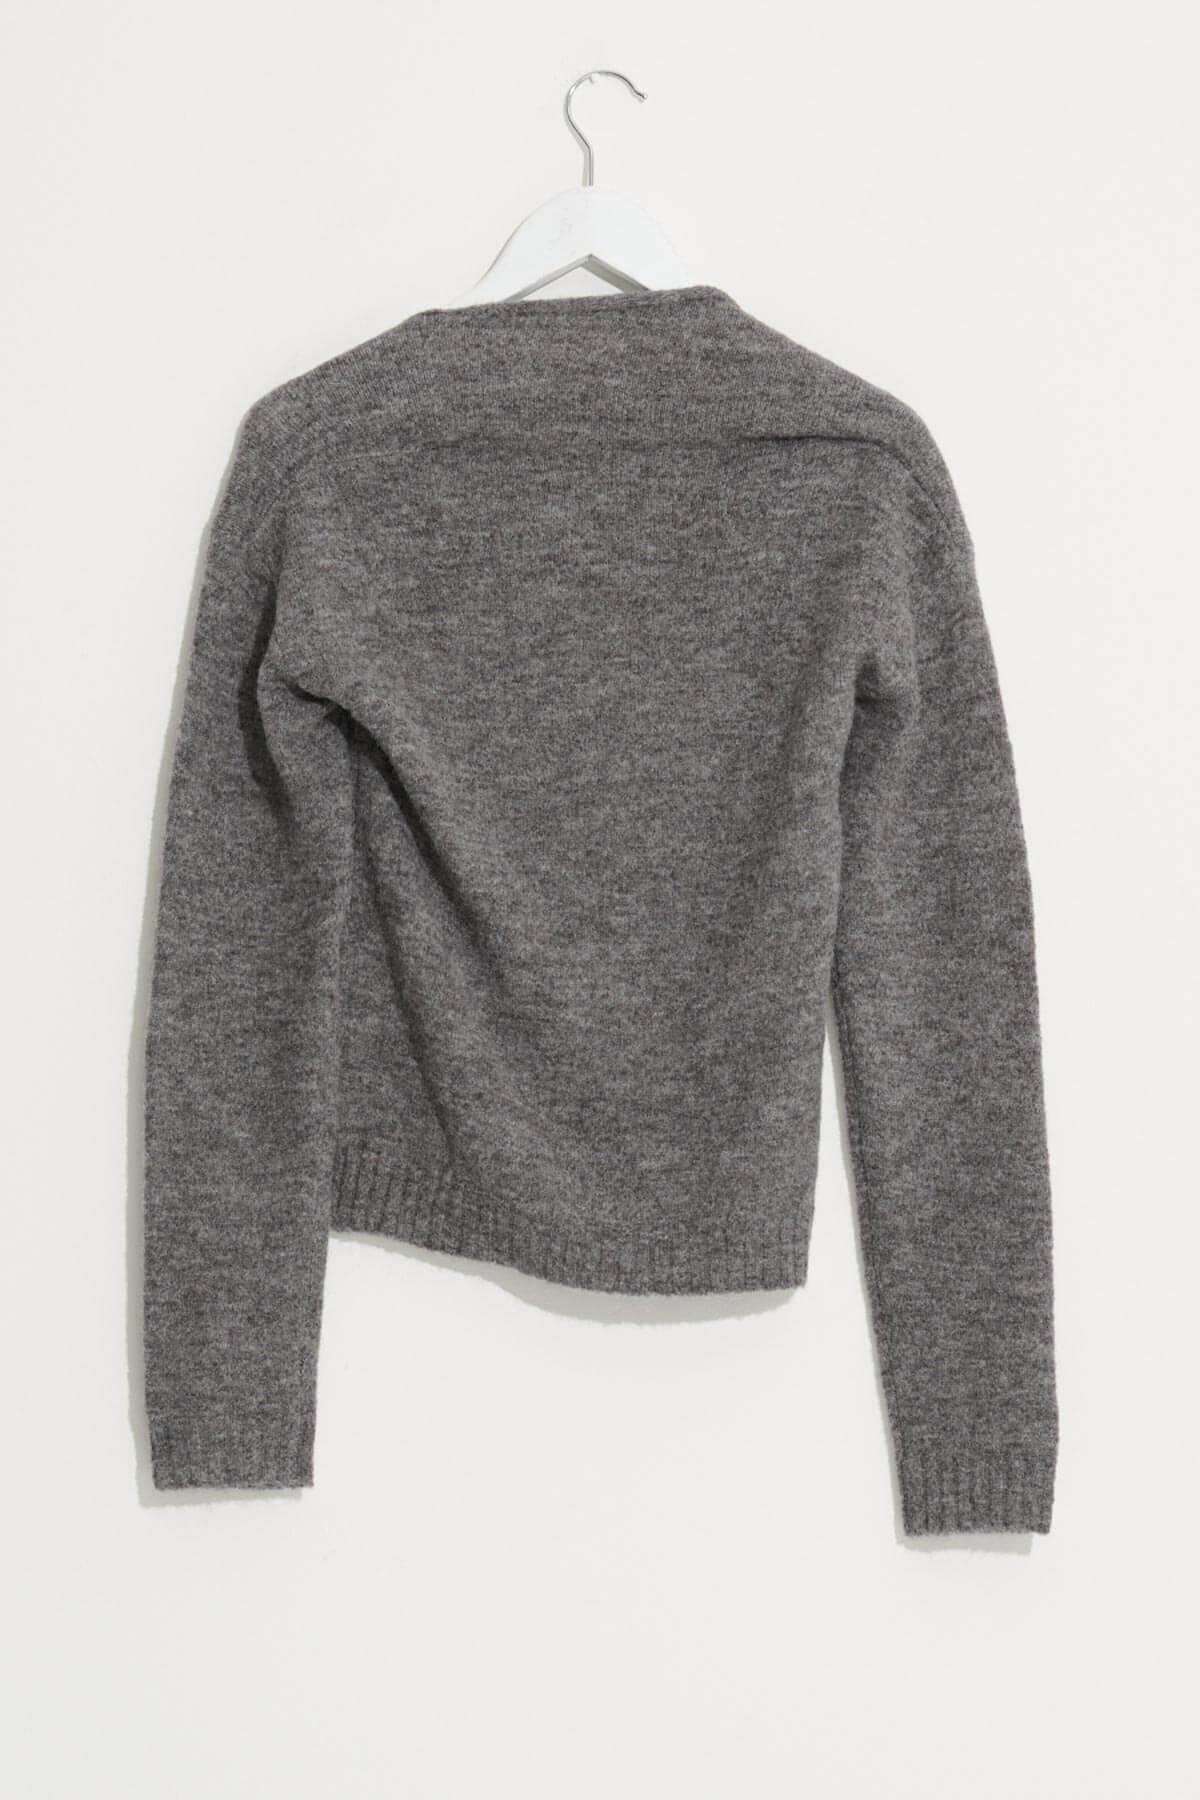 Misfit Shapes - Nights Over Egypt LS Knit - Charcoal